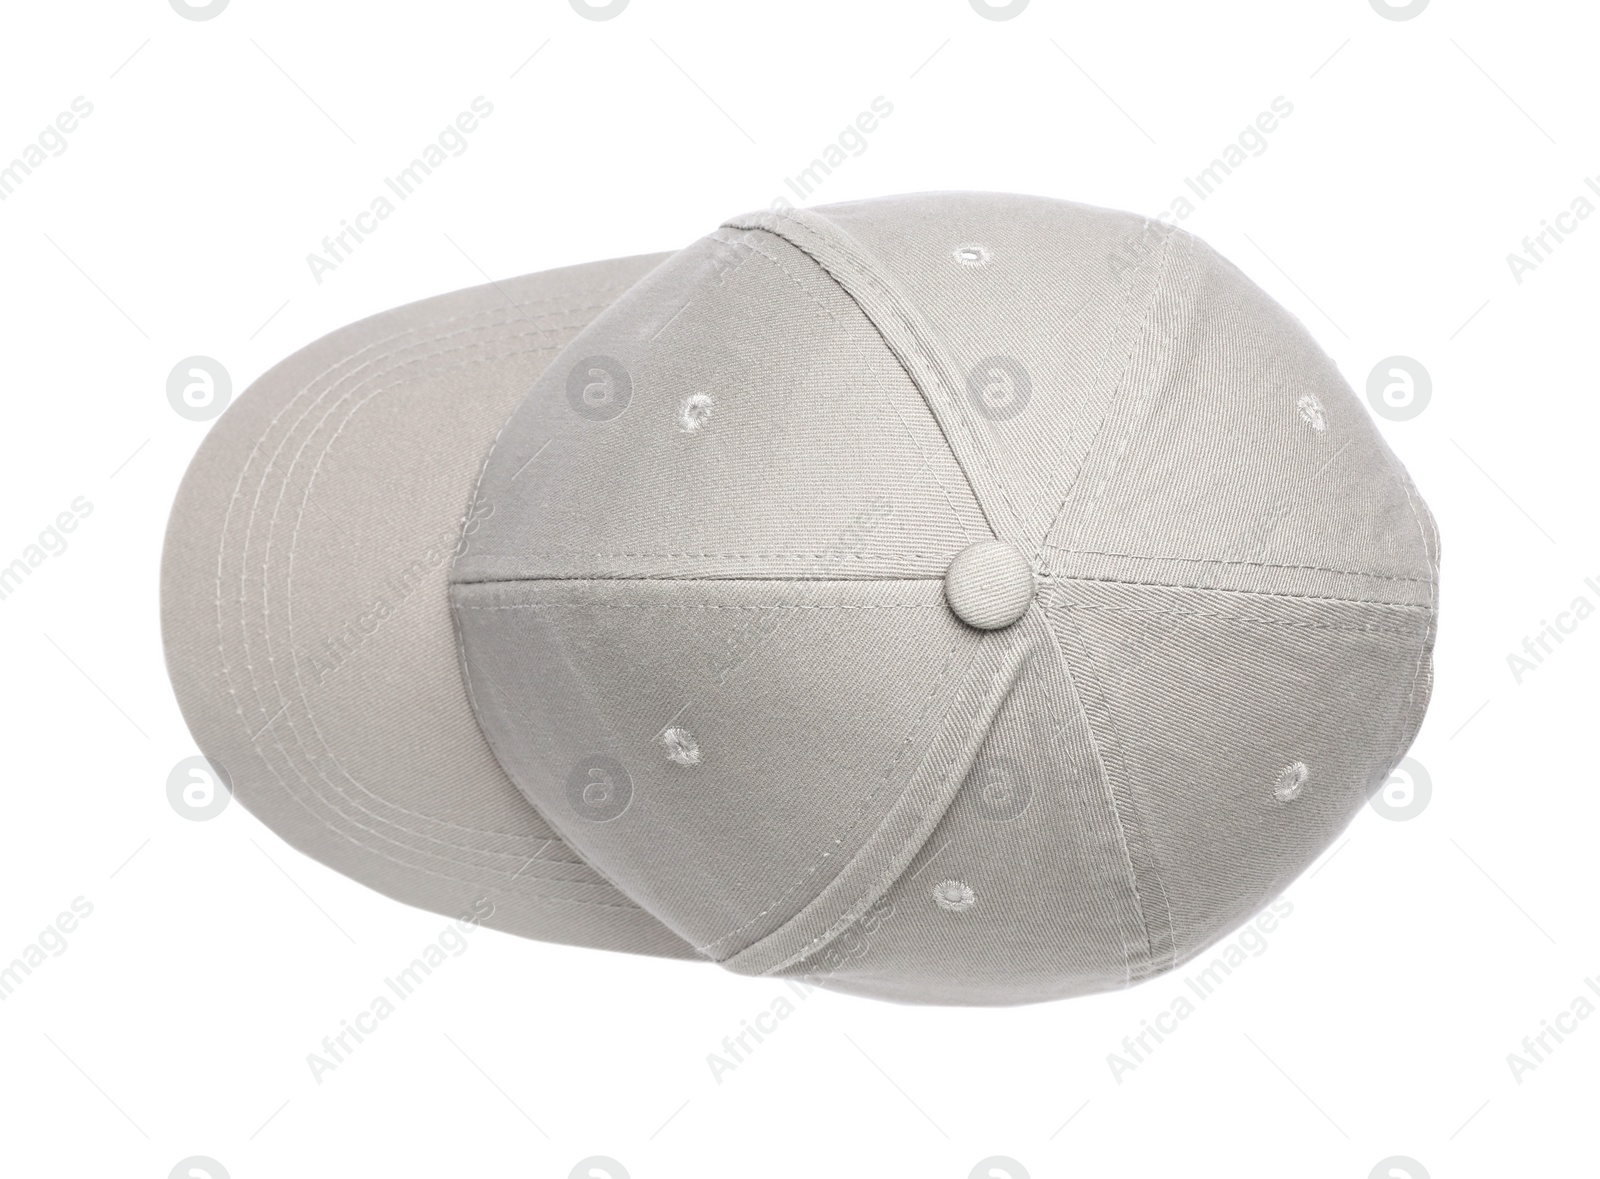 Photo of Stylish light grey baseball cap isolated on white, top view